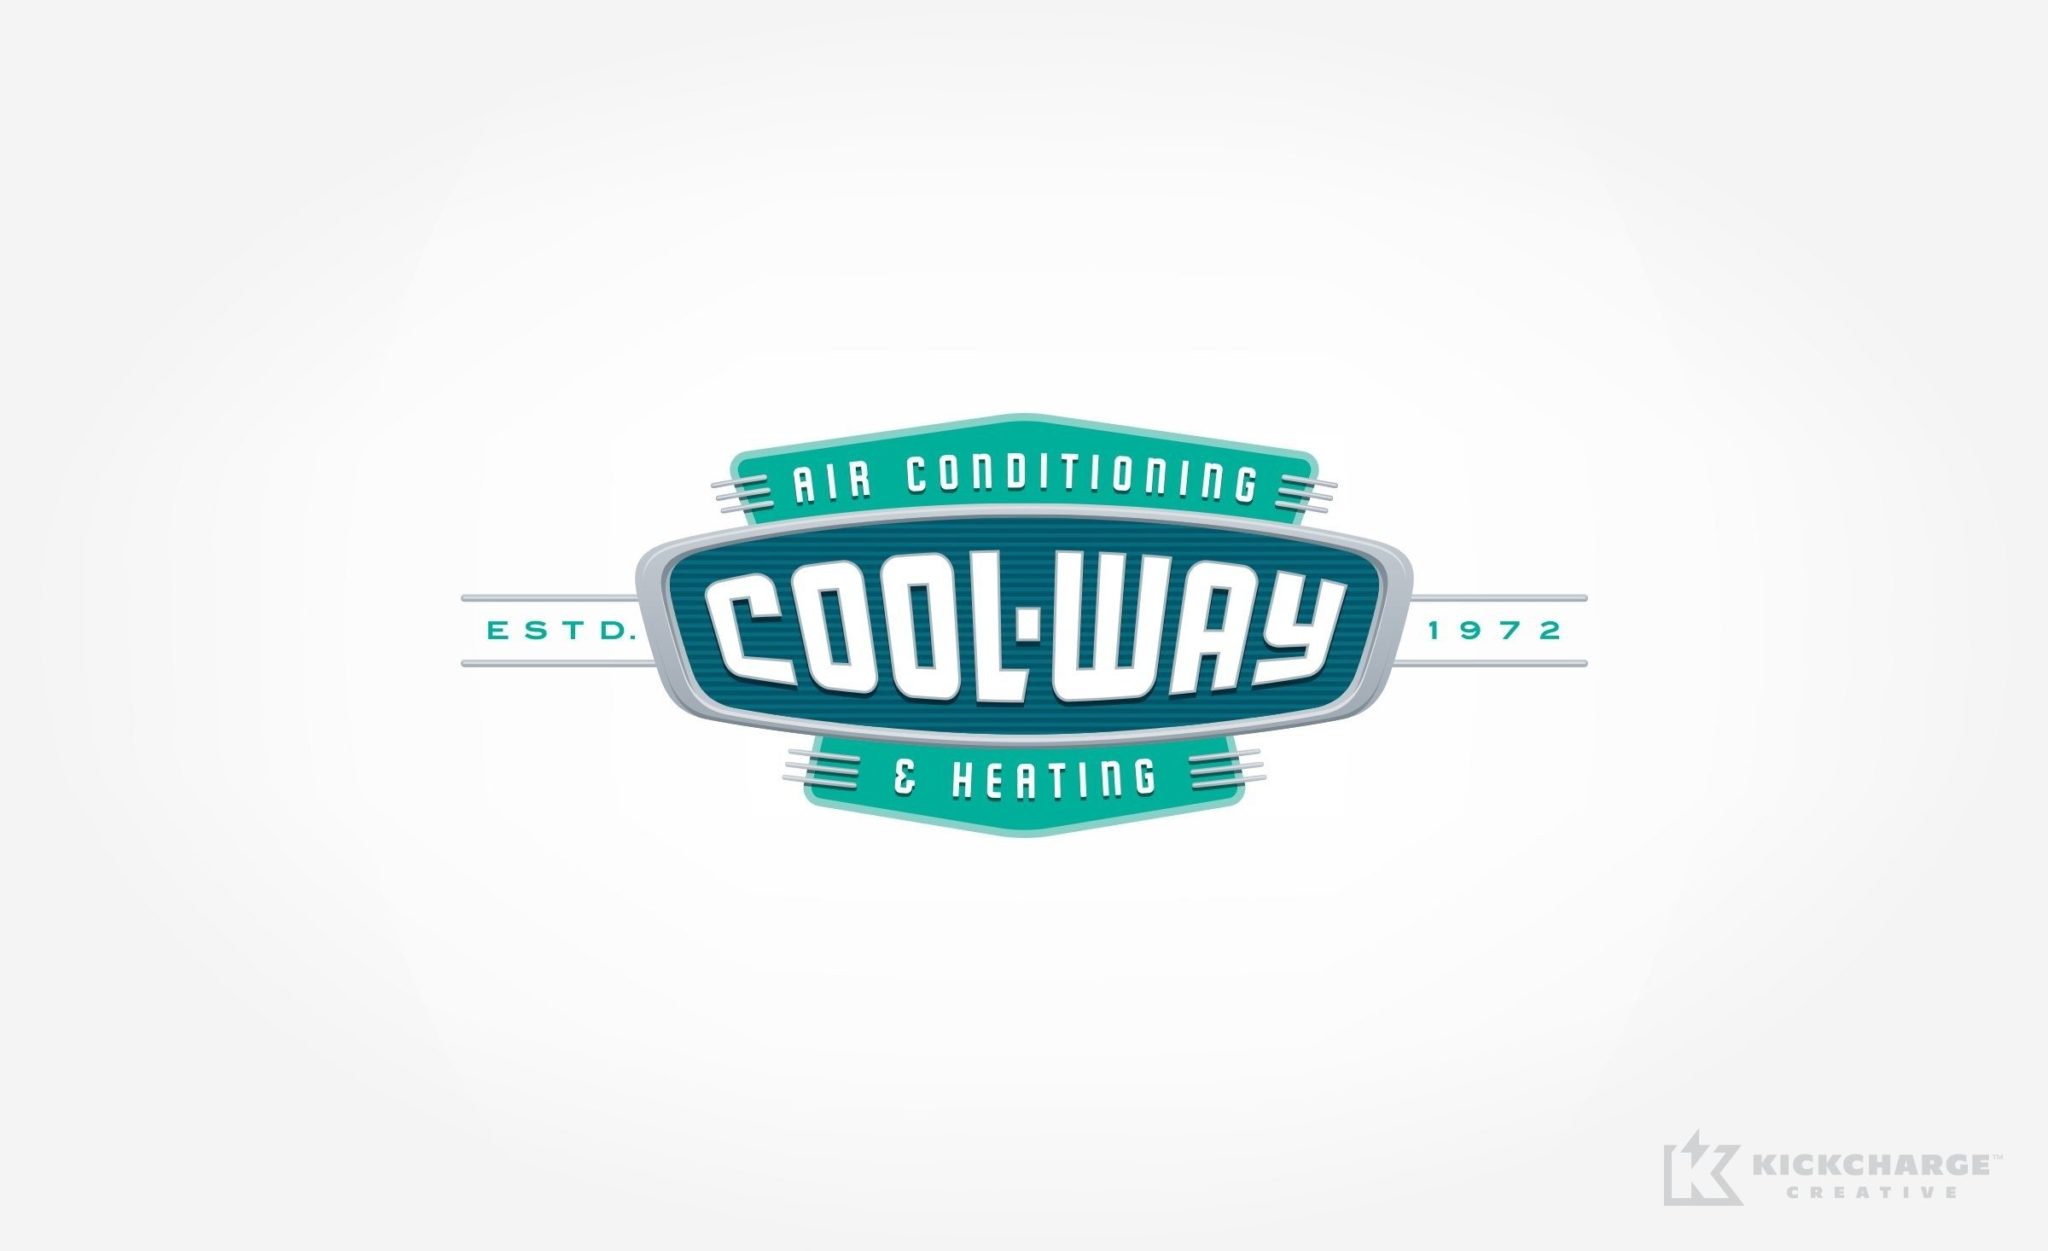 Cool-Way Heating & Air Conditioning